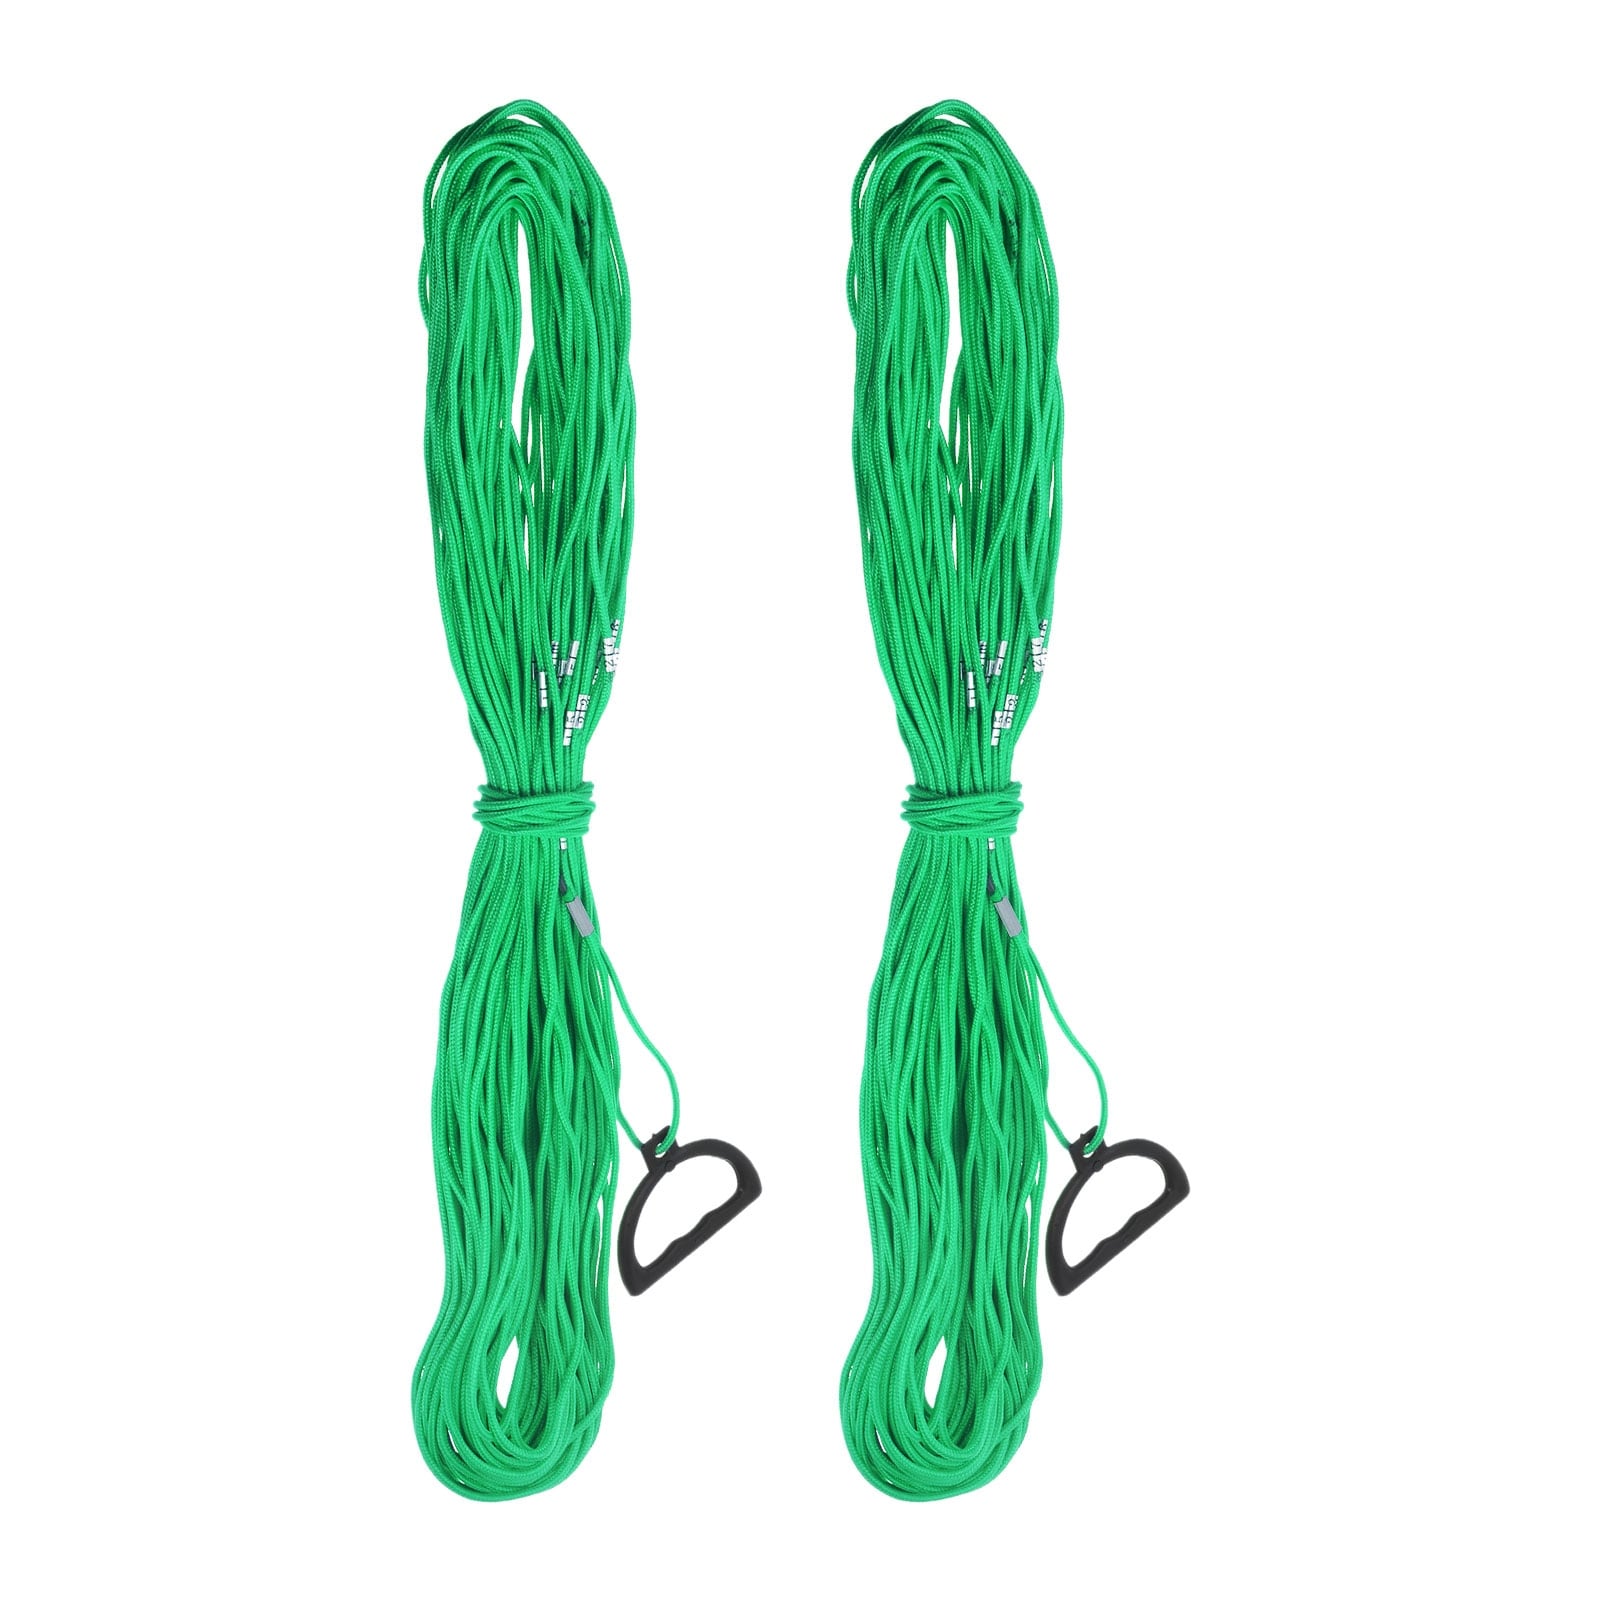 2pcs Deep Well Measuring Rope 50m Steel Wire Nylon Coated w Pull Ring -  Green - Bed Bath & Beyond - 37206844